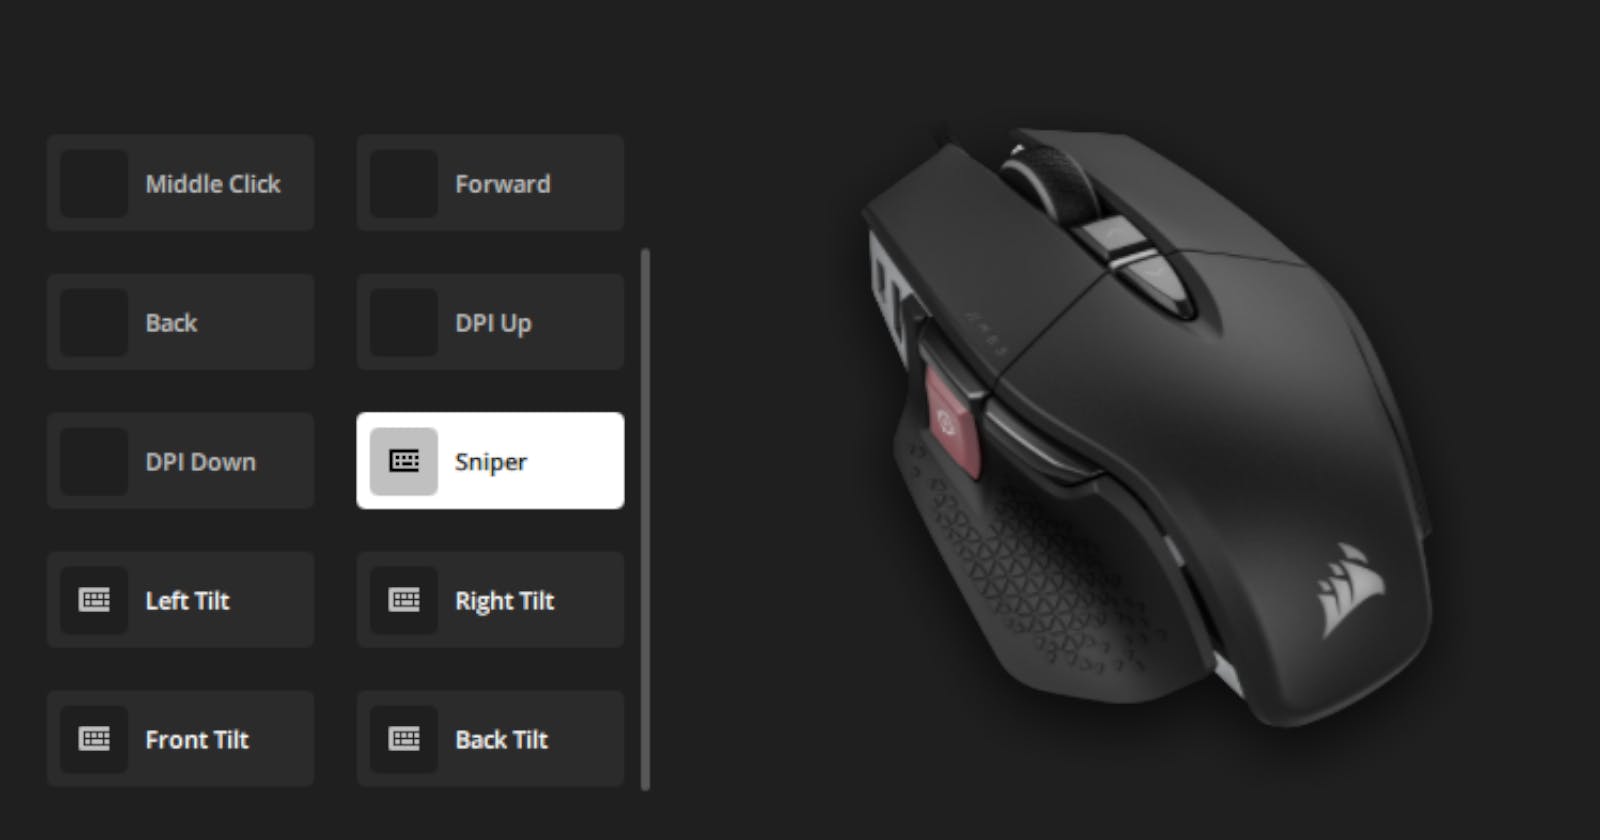 The Dev Mouse